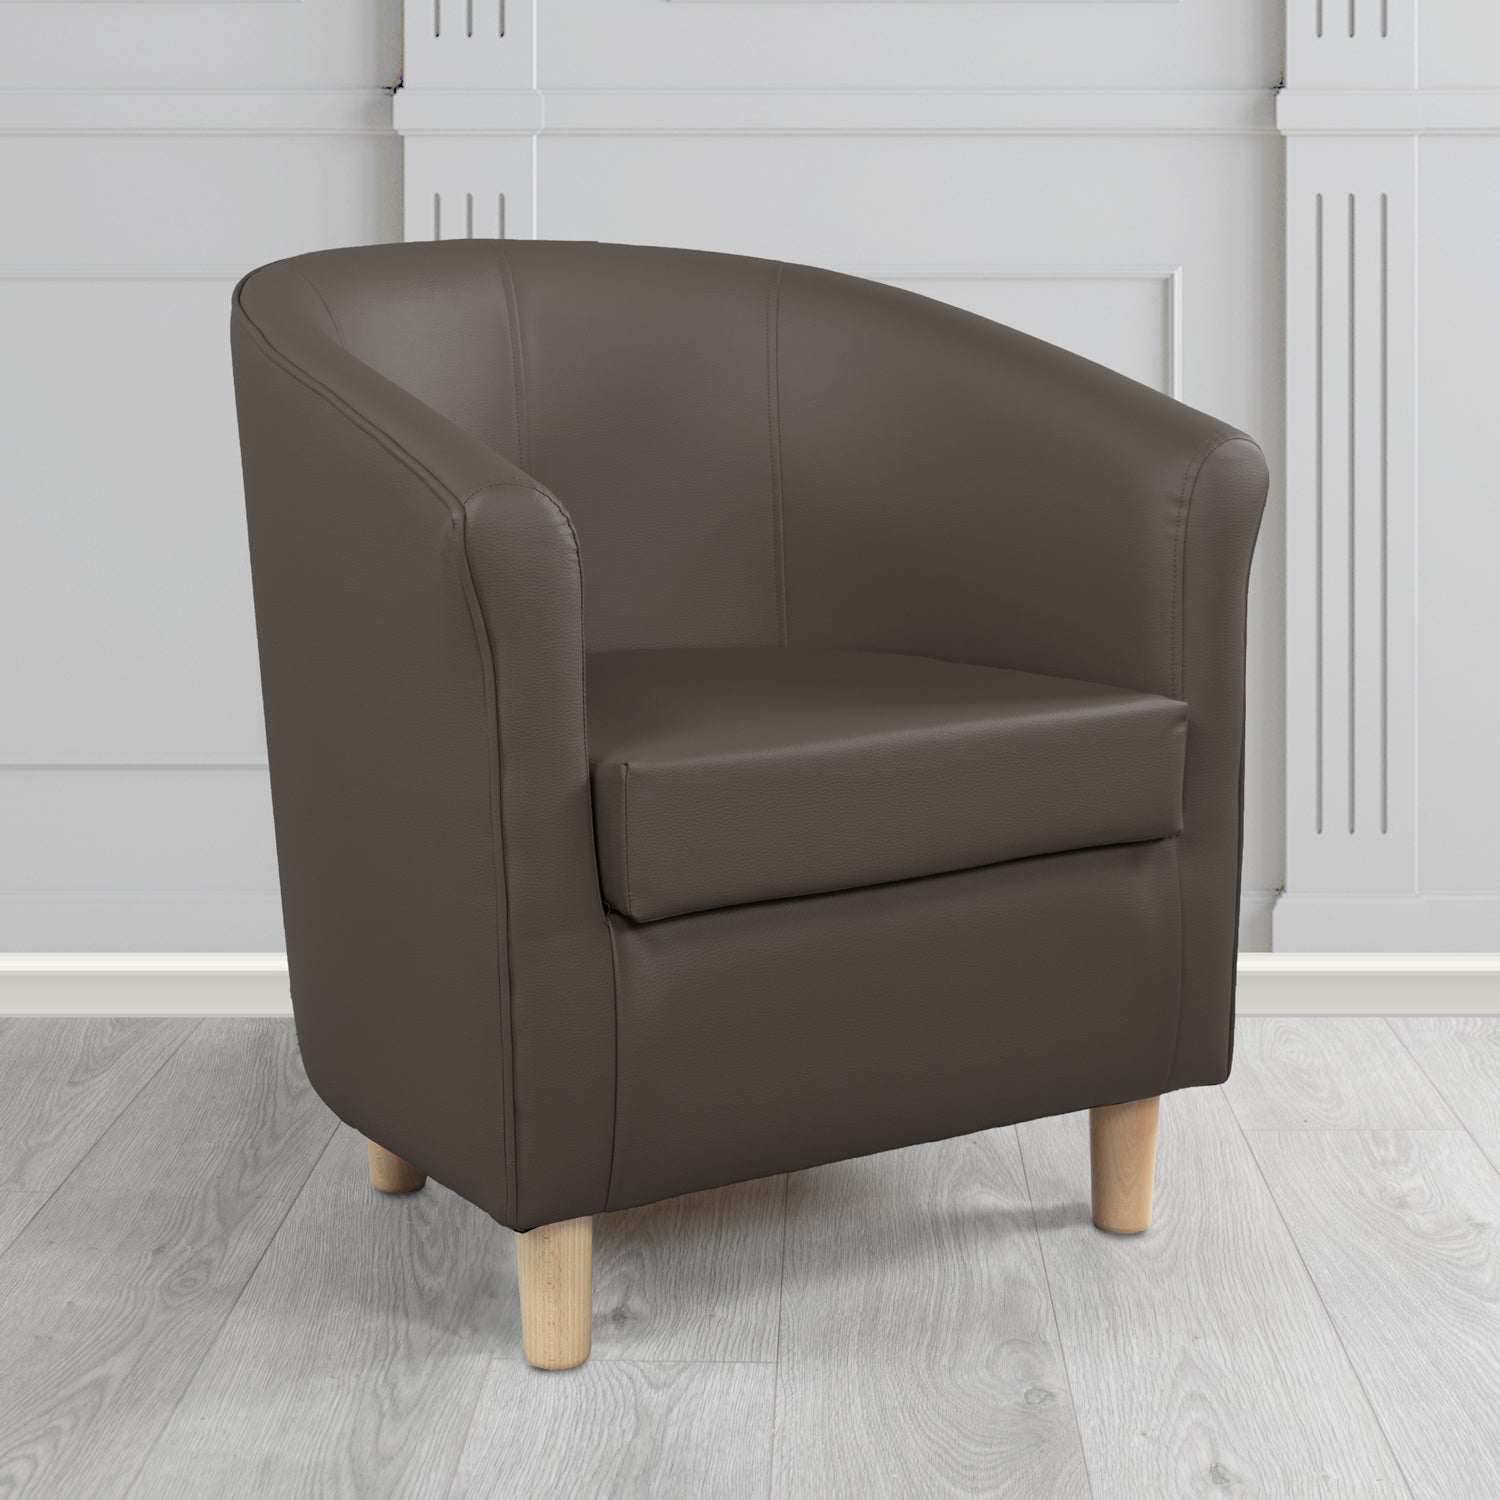 Tuscany Tub Chair in Madrid Chocolate Faux Leather - The Tub Chair Shop